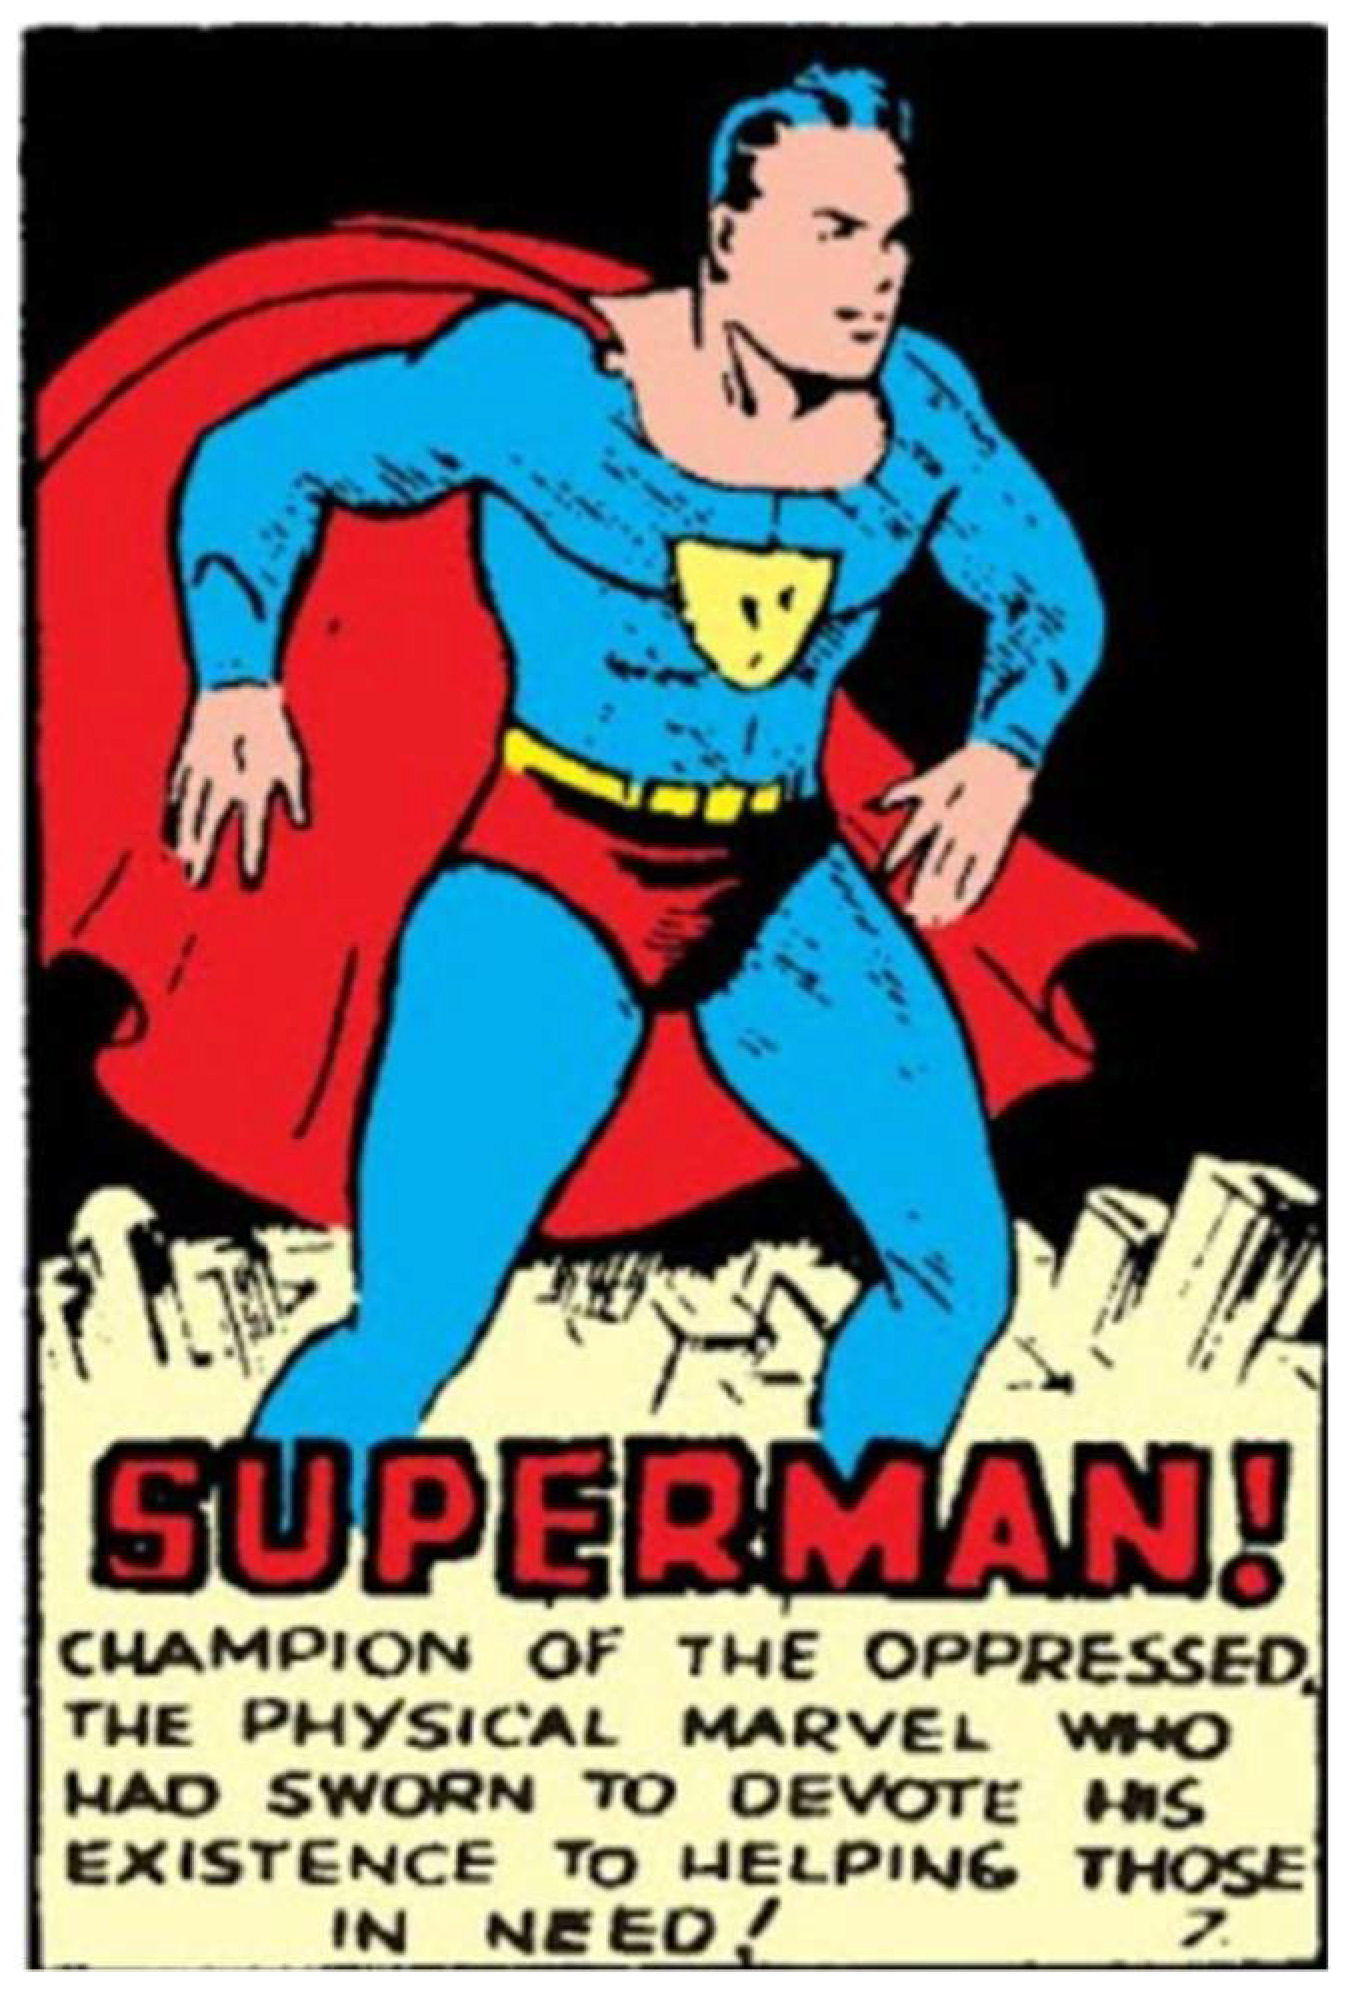 Do you think Superman is a heavy person or is weighs like a normal